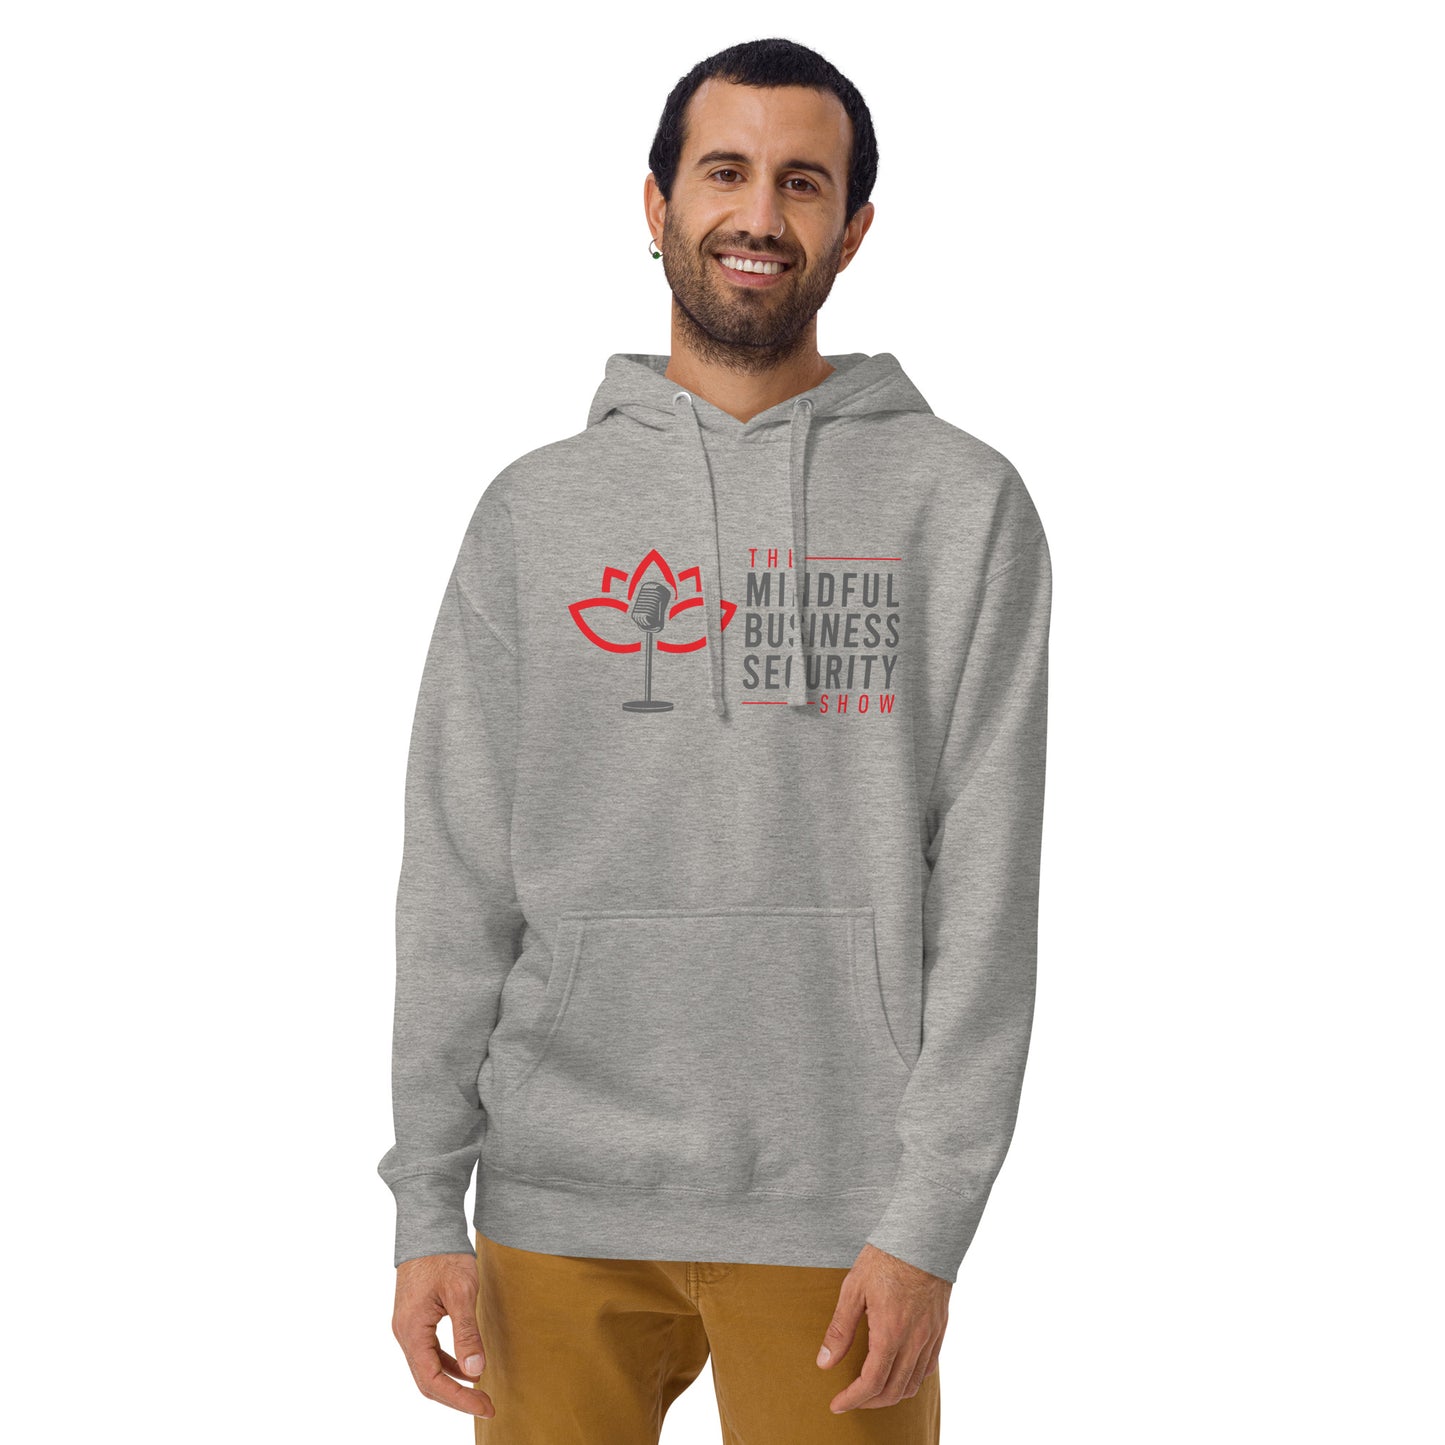 The Mindful Business Security Hoodie